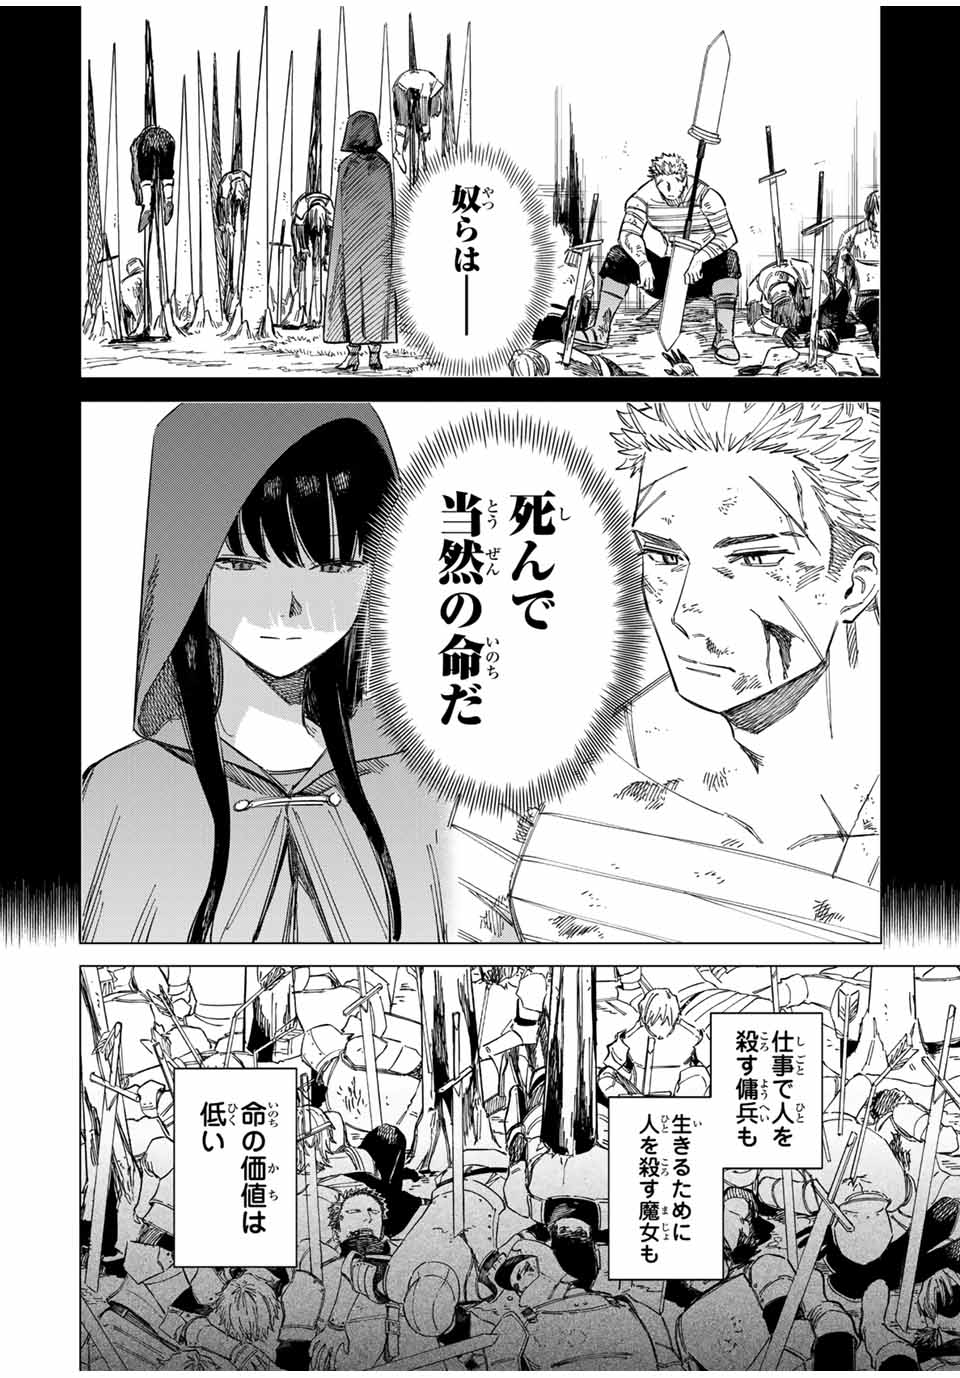 Witch and Mercenary 魔女と傭兵 第1.2話 - Page 24